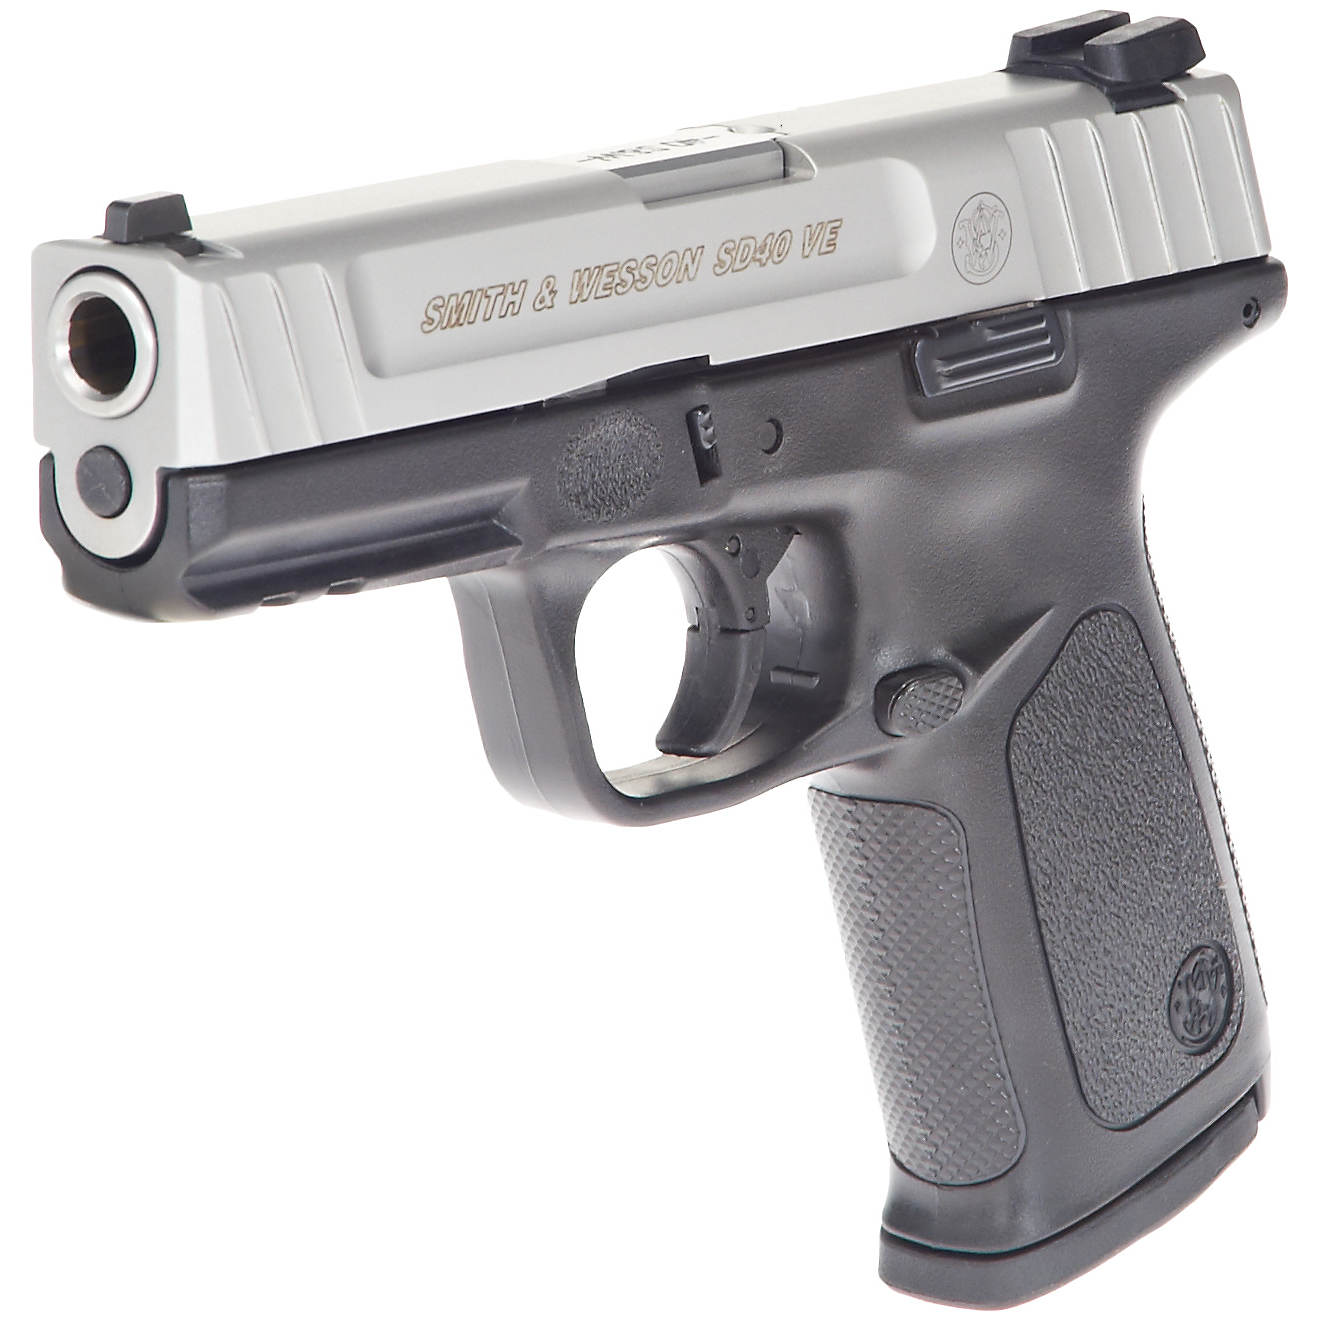 smith & wesson sd40 ve 40 s&w full-sized